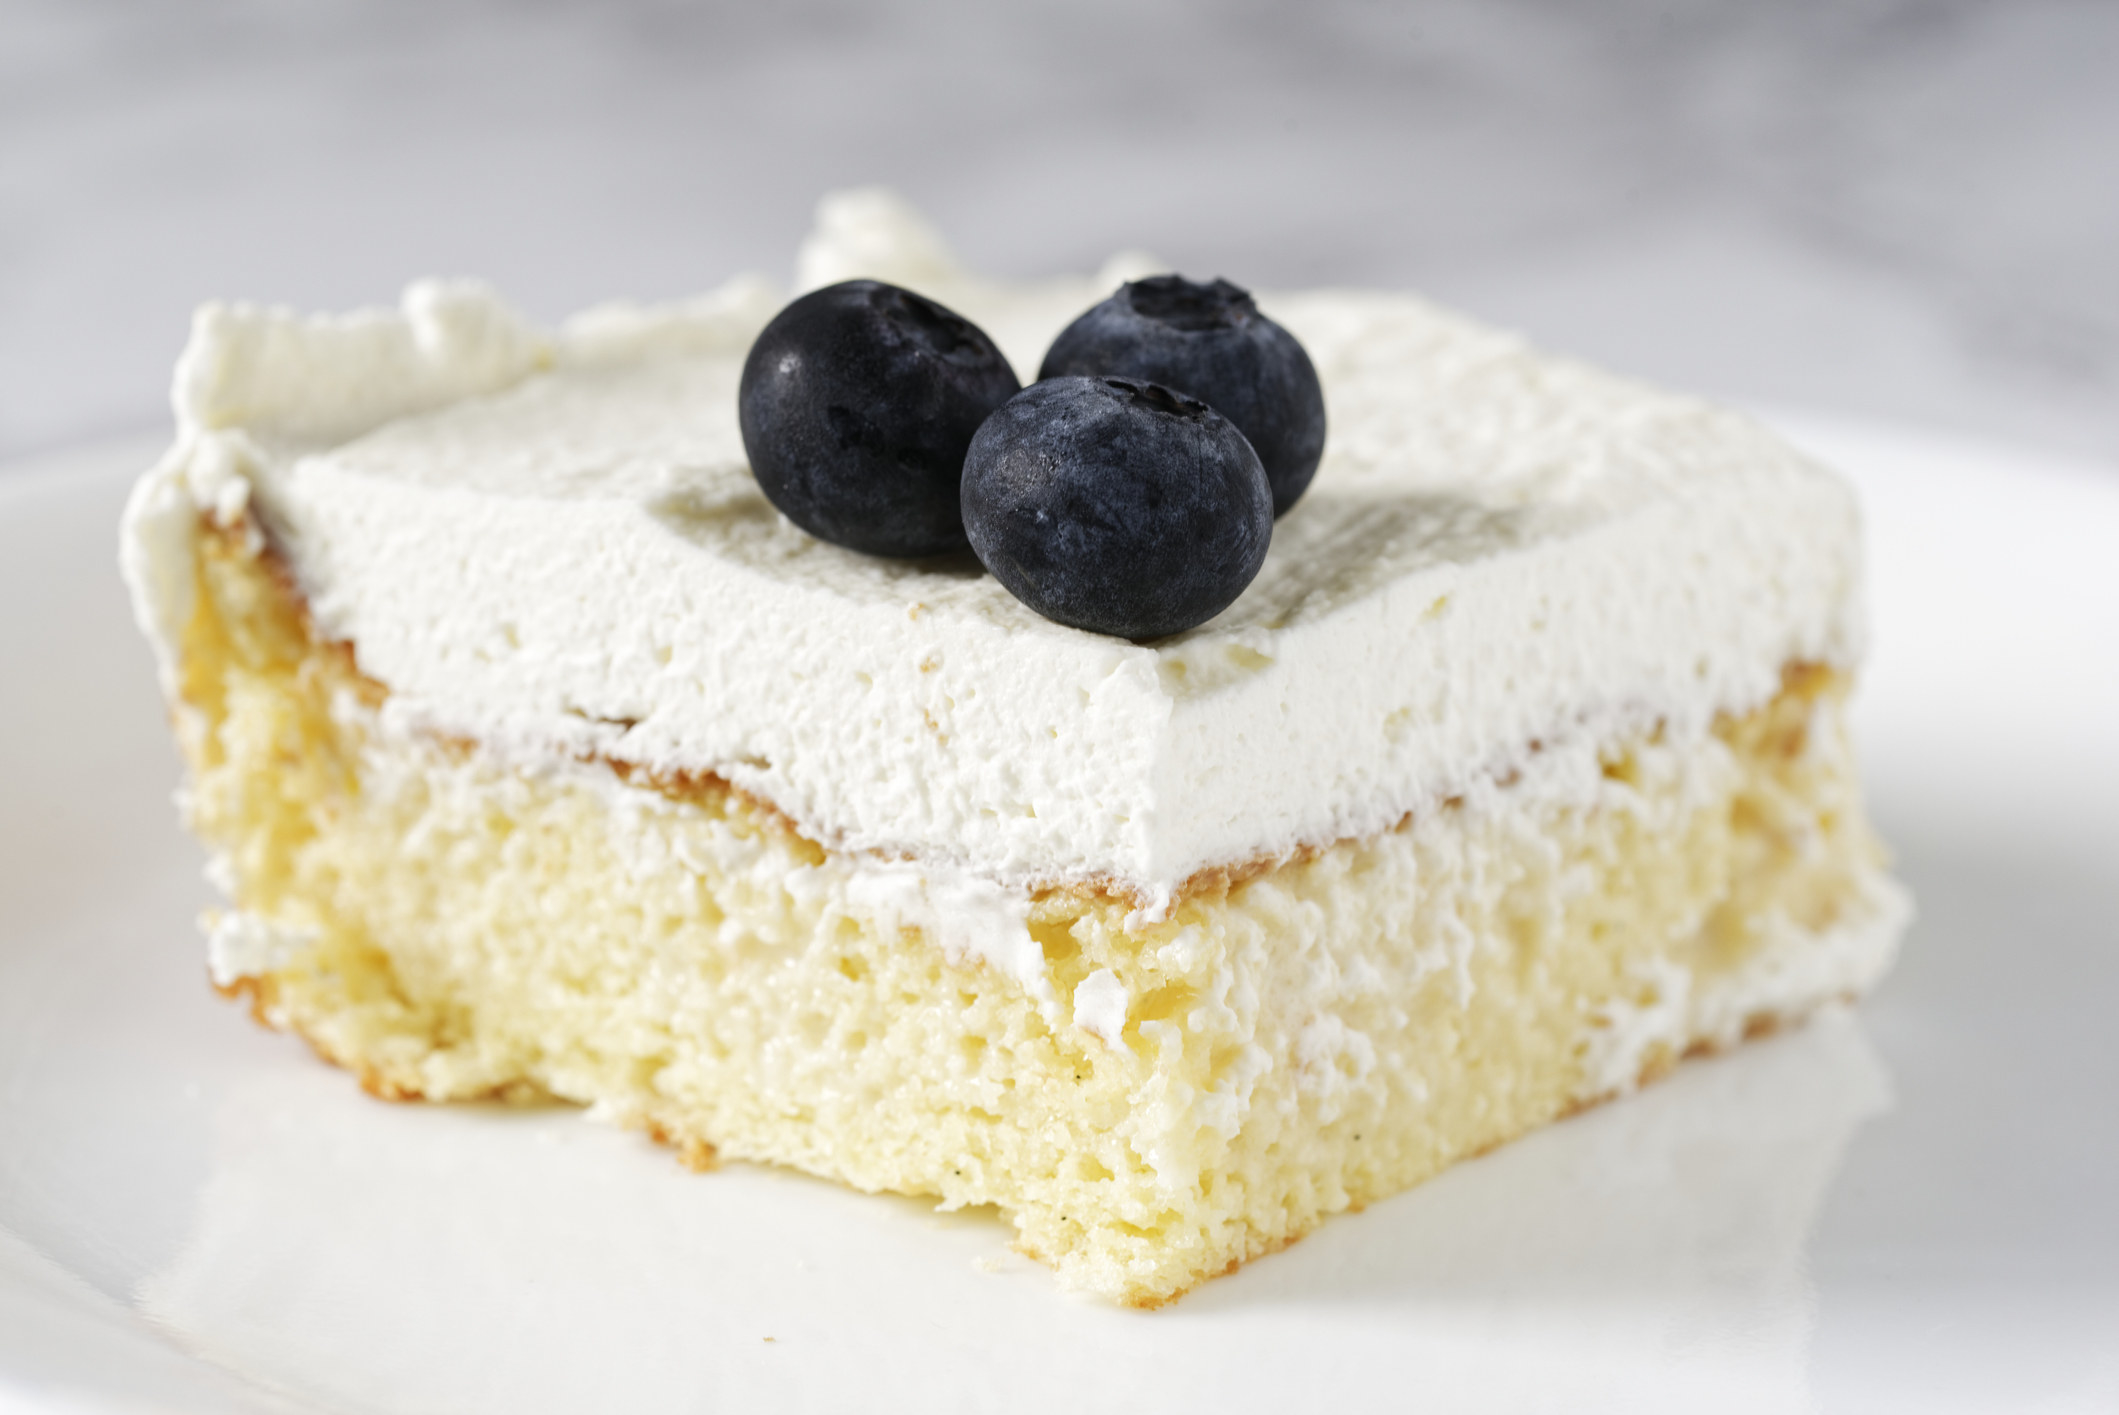 A slice of cake with vanilla frosting and blueberries.